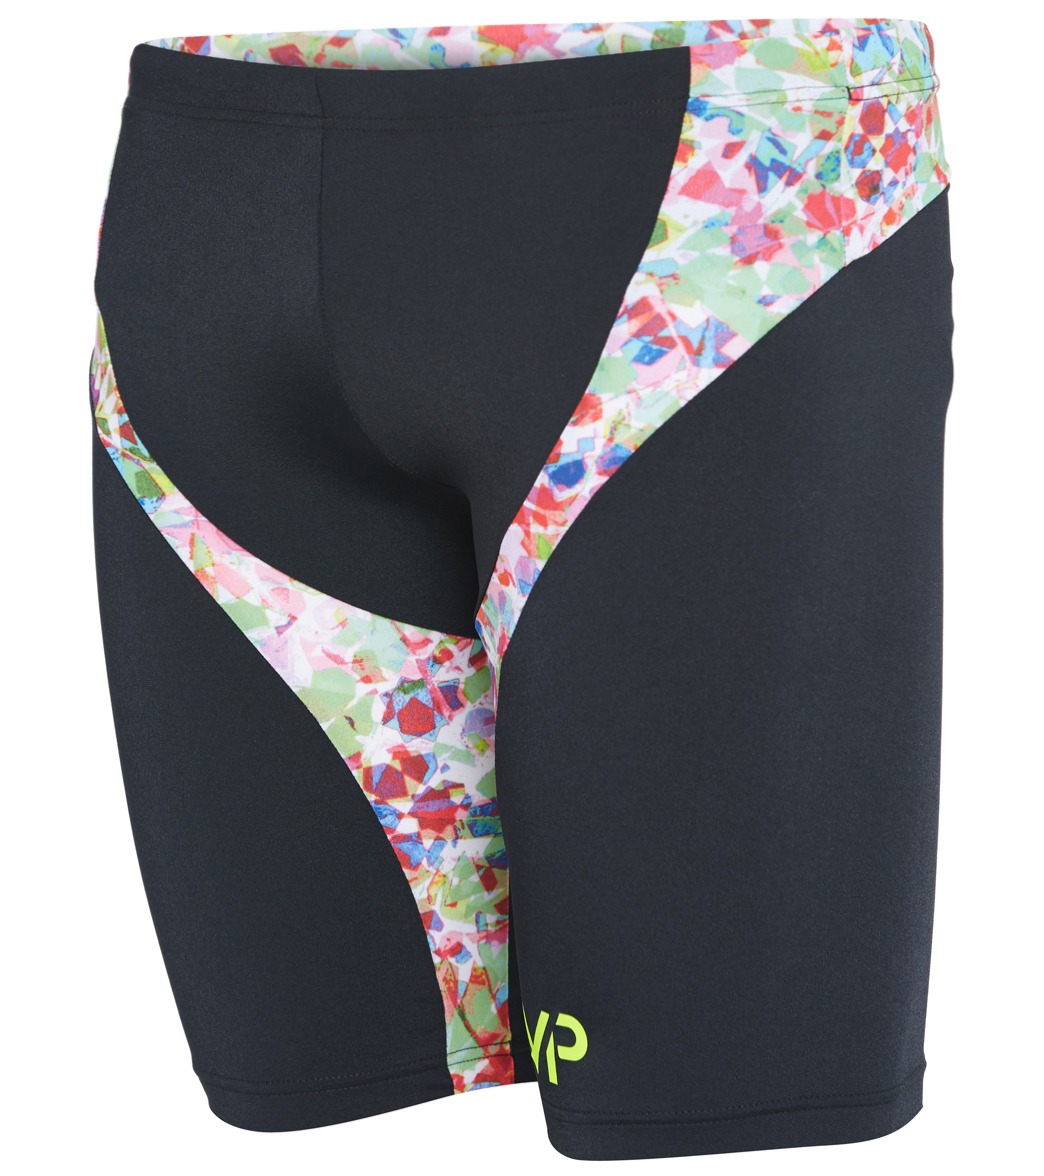 MP Michael Phelps Prisma Jammer Swimsuit at SwimOutlet.com - Free Shipping